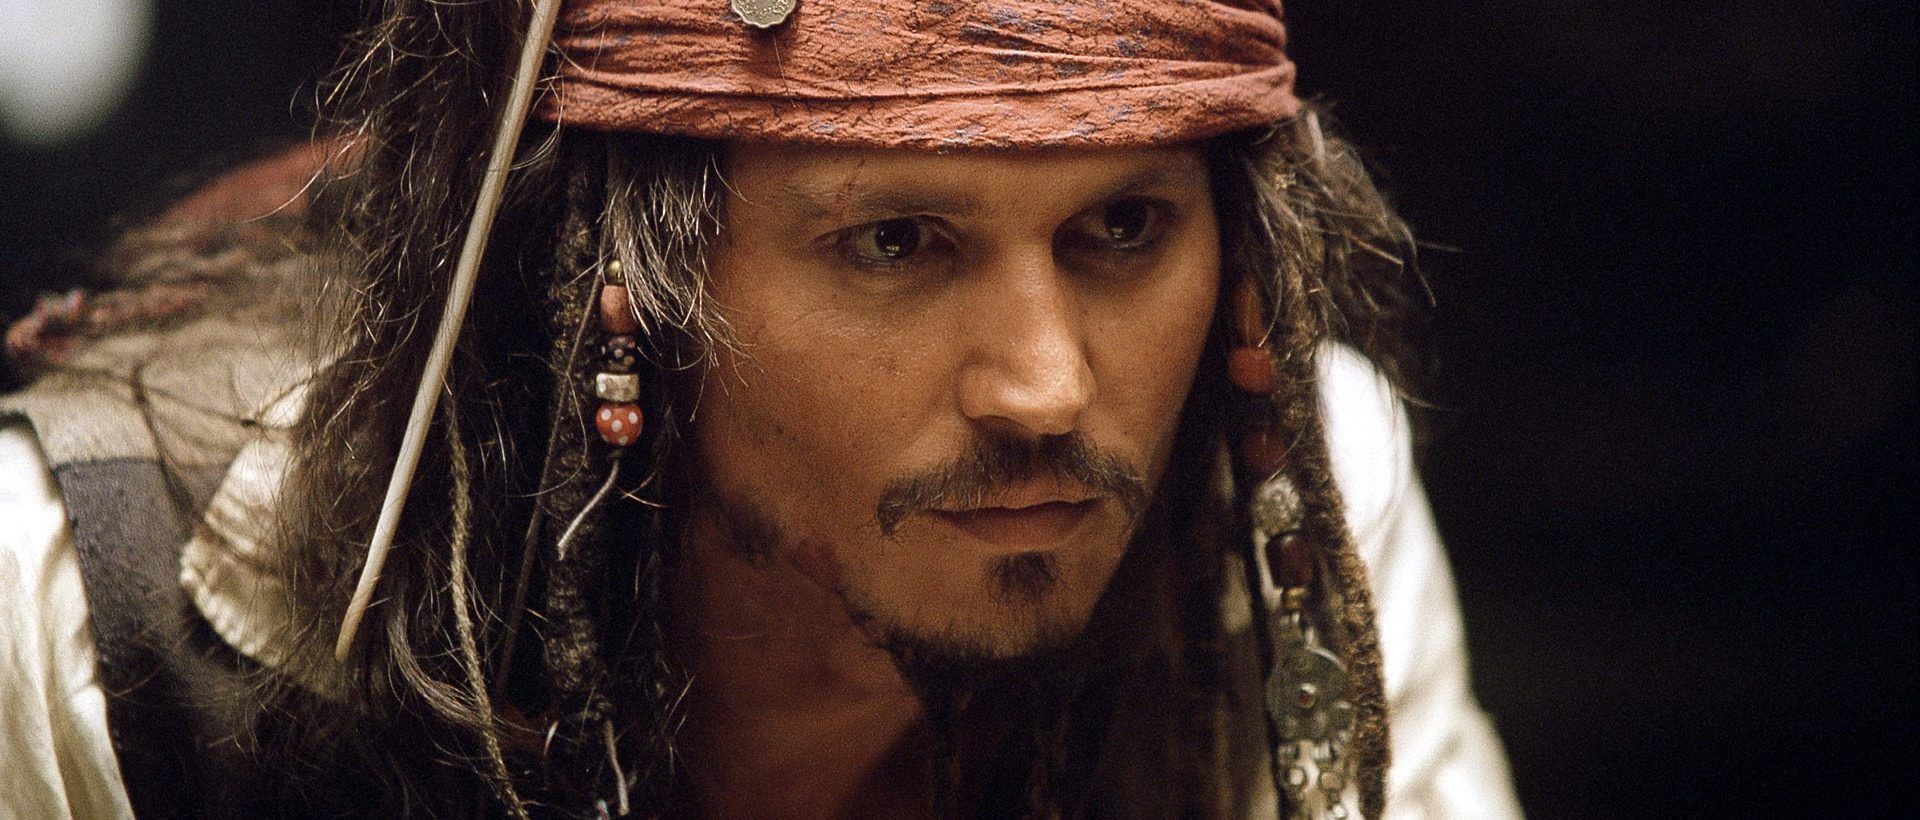 Should Disney Rehire Johnny Depp As Captain Jack Sparrow In Pirates Of The Caribbean 6?